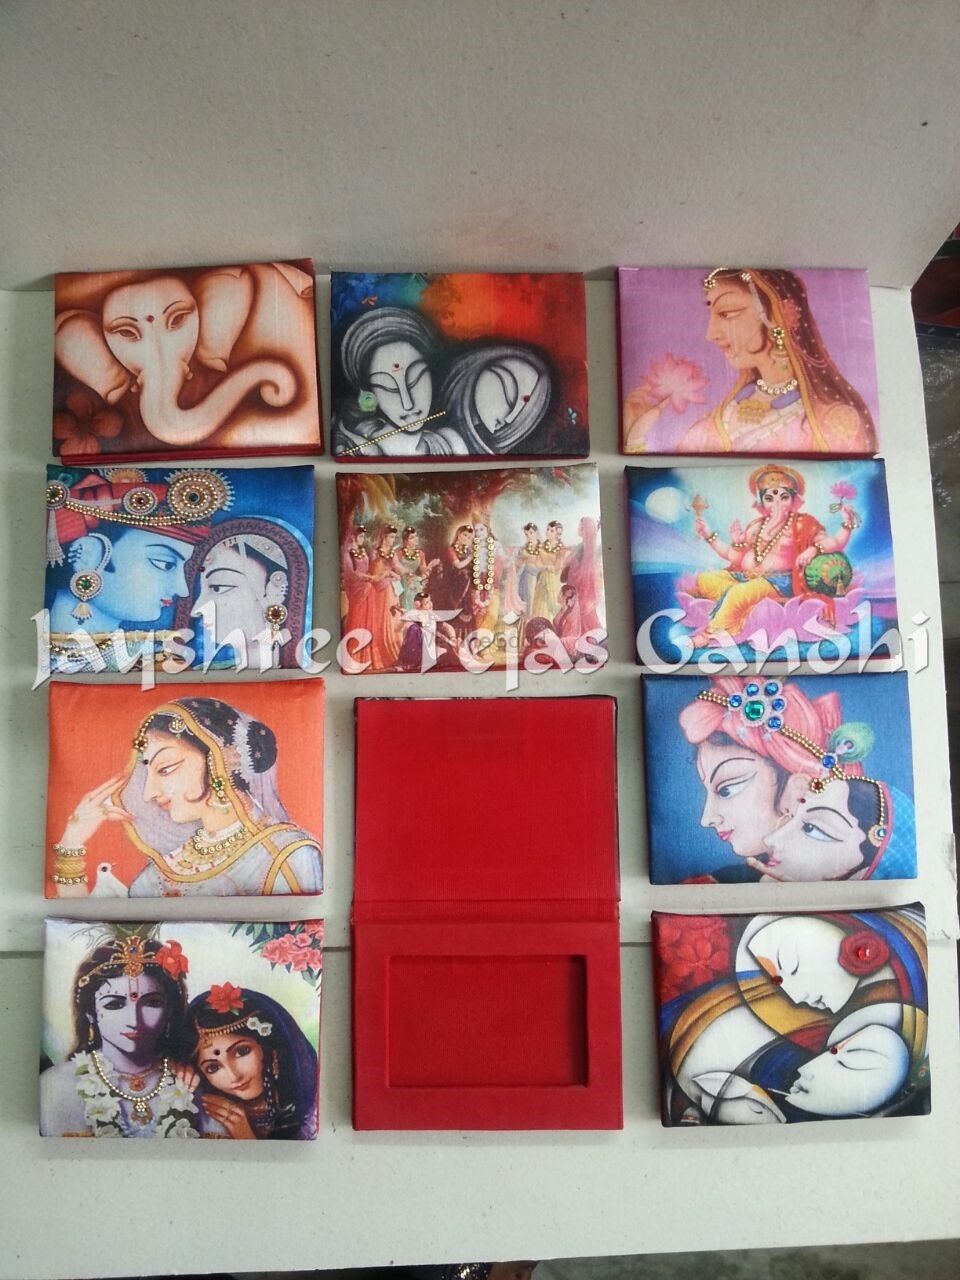 Photo From Coin & Jewellery Boxes - By Jayshree Tejas Gandhi